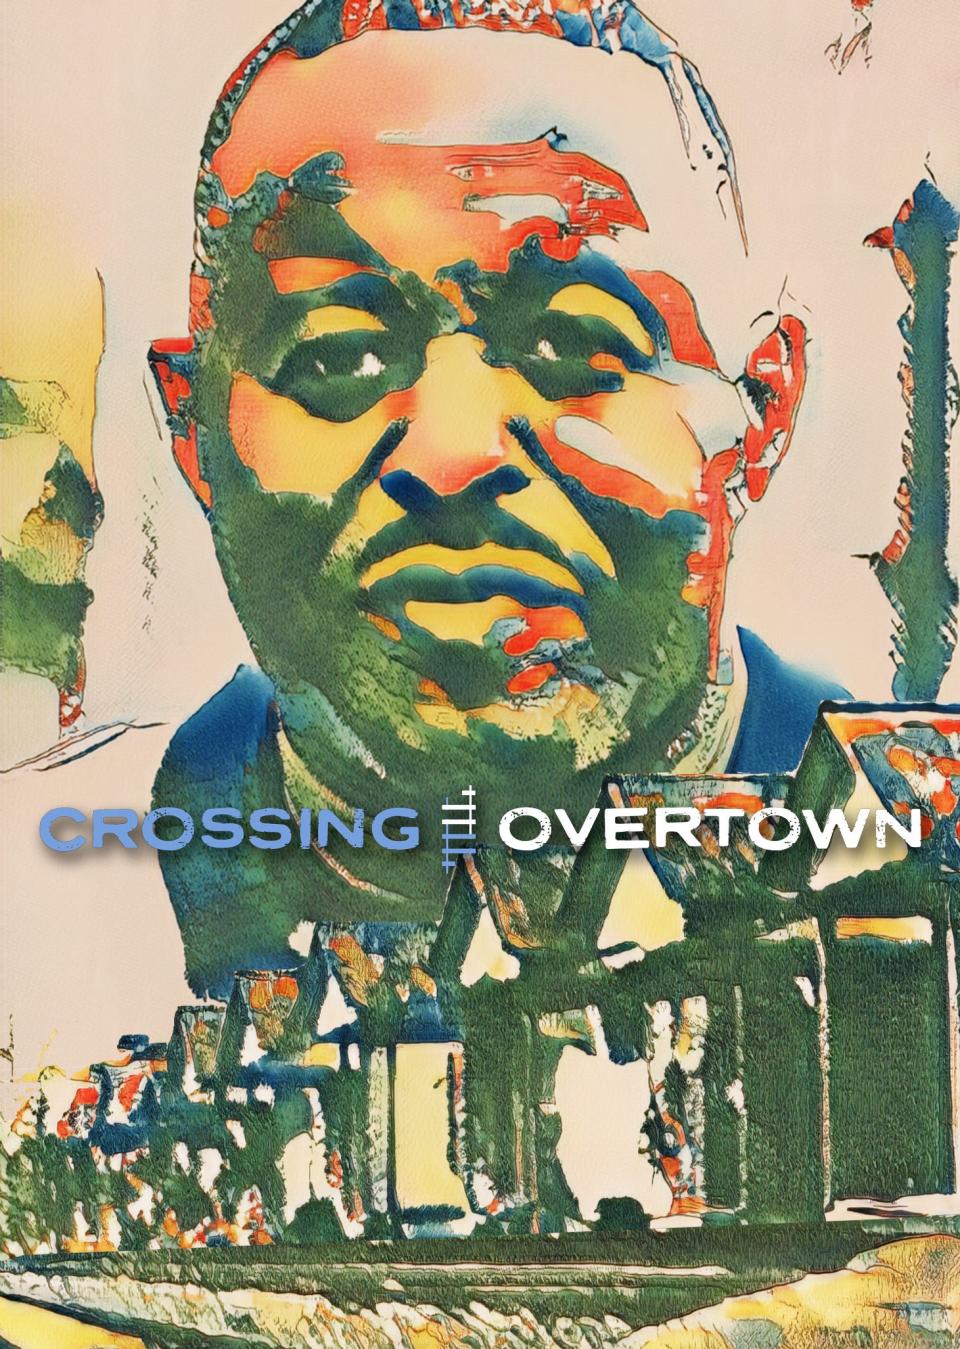 A poster for the documentary "Crossing Overtown," which explores the history of race relations in Miami.